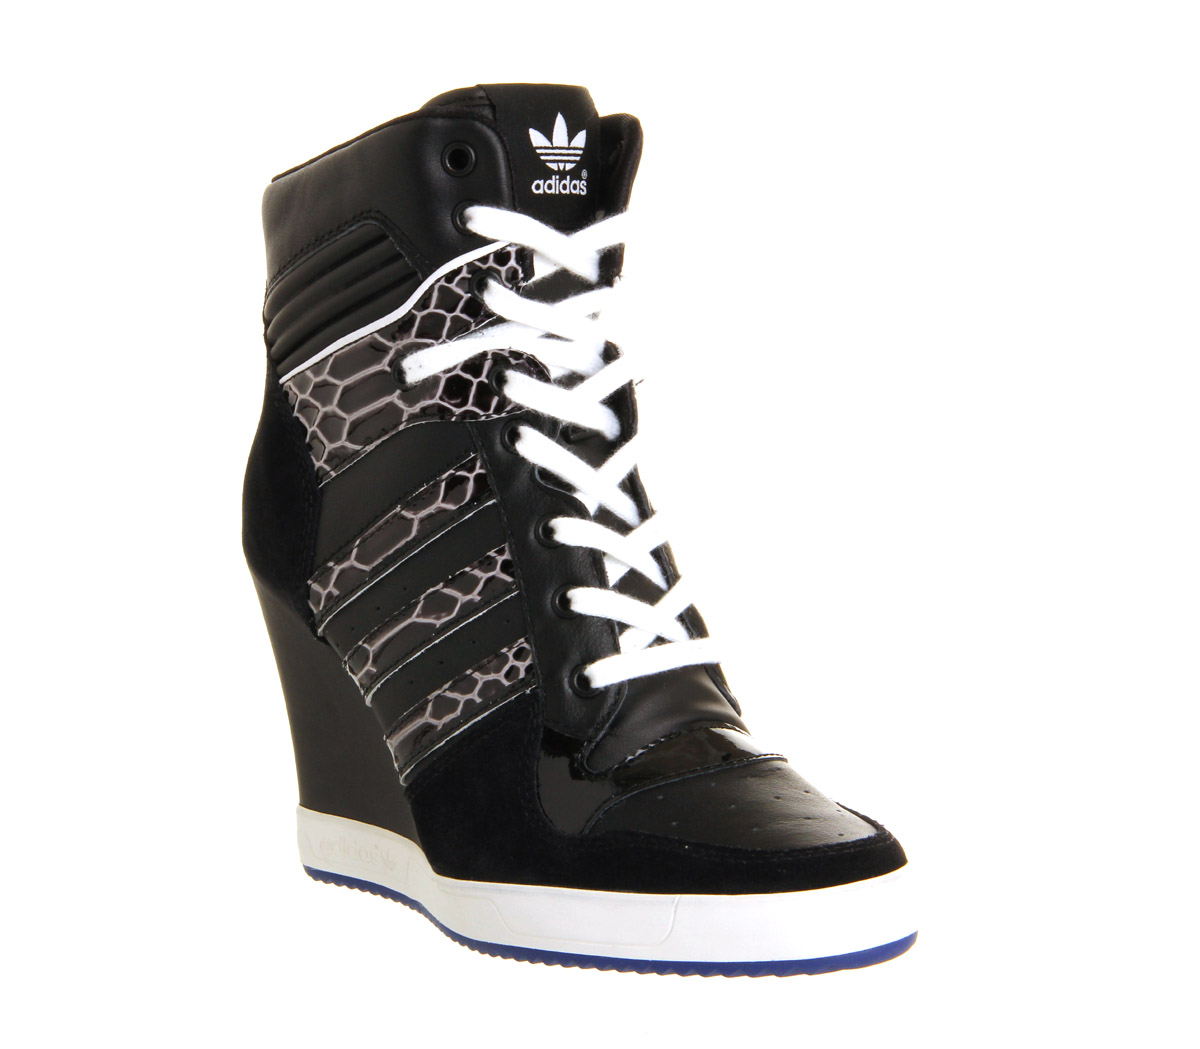 adidas Rivalry Wedge Black White - Hers trainers